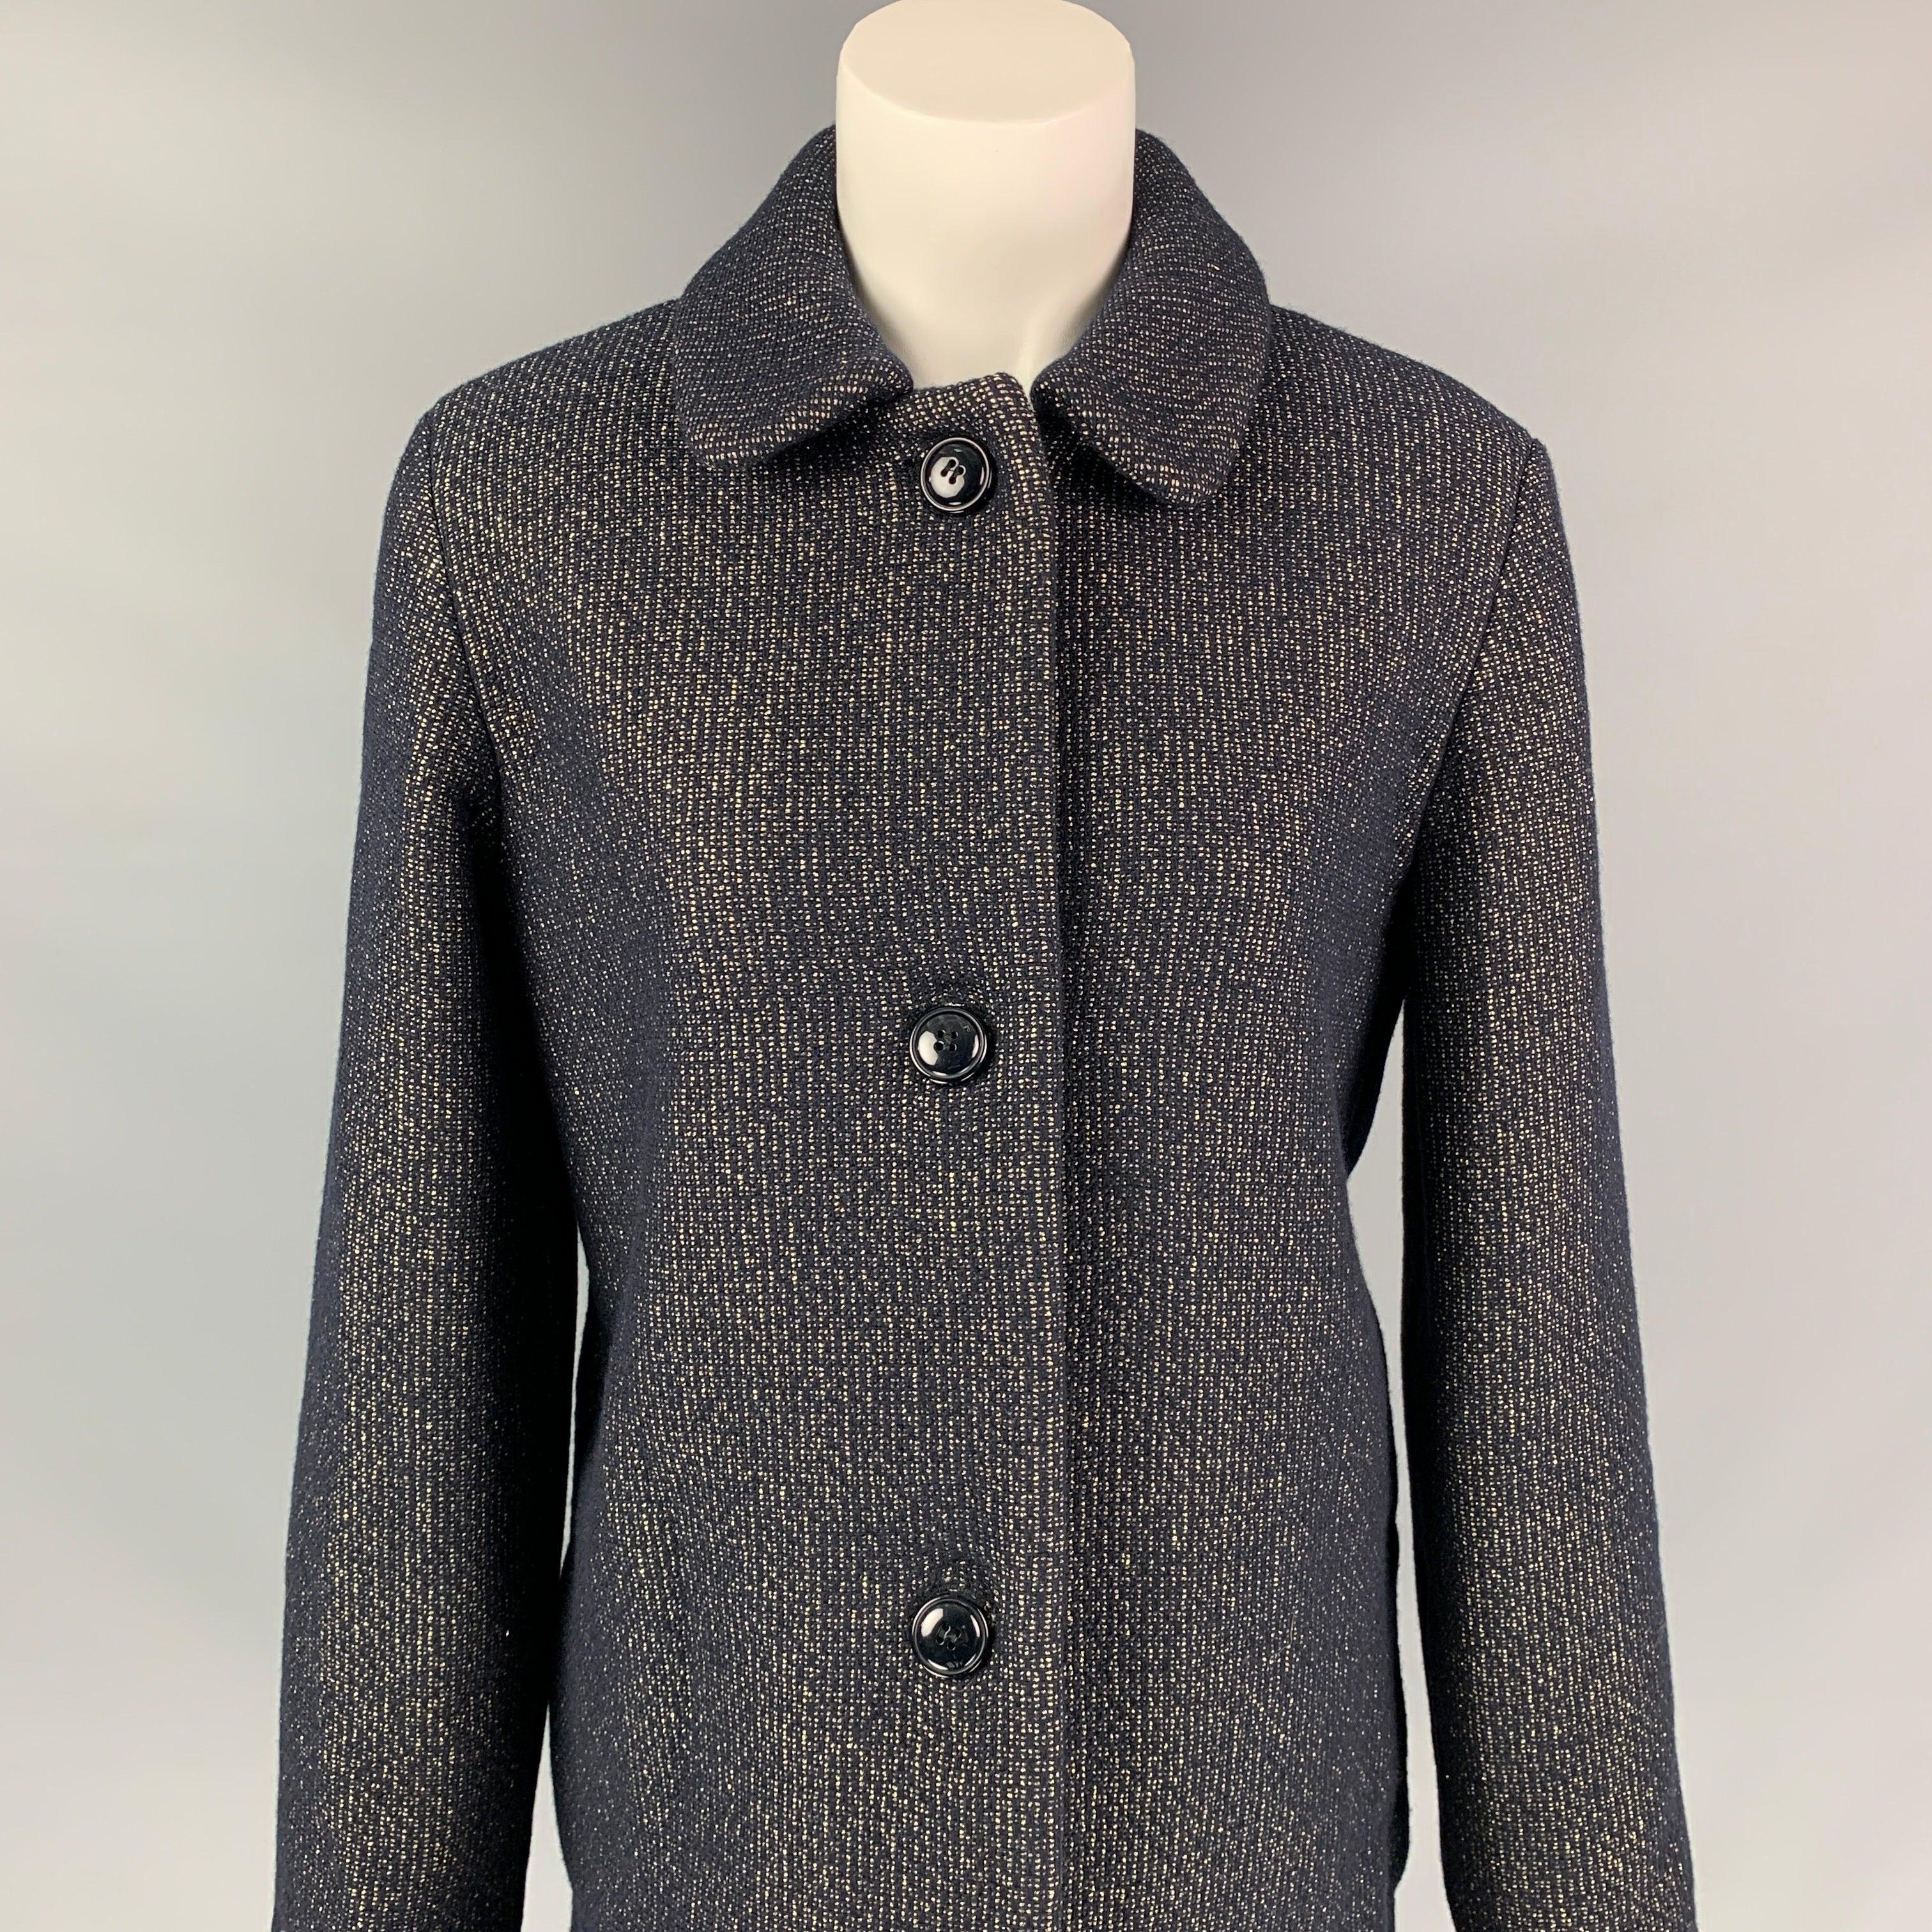 A.P.C coat comes in a black & gold metallic heather wool blend with a full liner featuring a spread collar, slit pockets, single back vent, and a buttoned closure.
Very Good
Pre-Owned Condition. 

Marked:  38 

Measurements: 
 
Shoulder:
 16.5